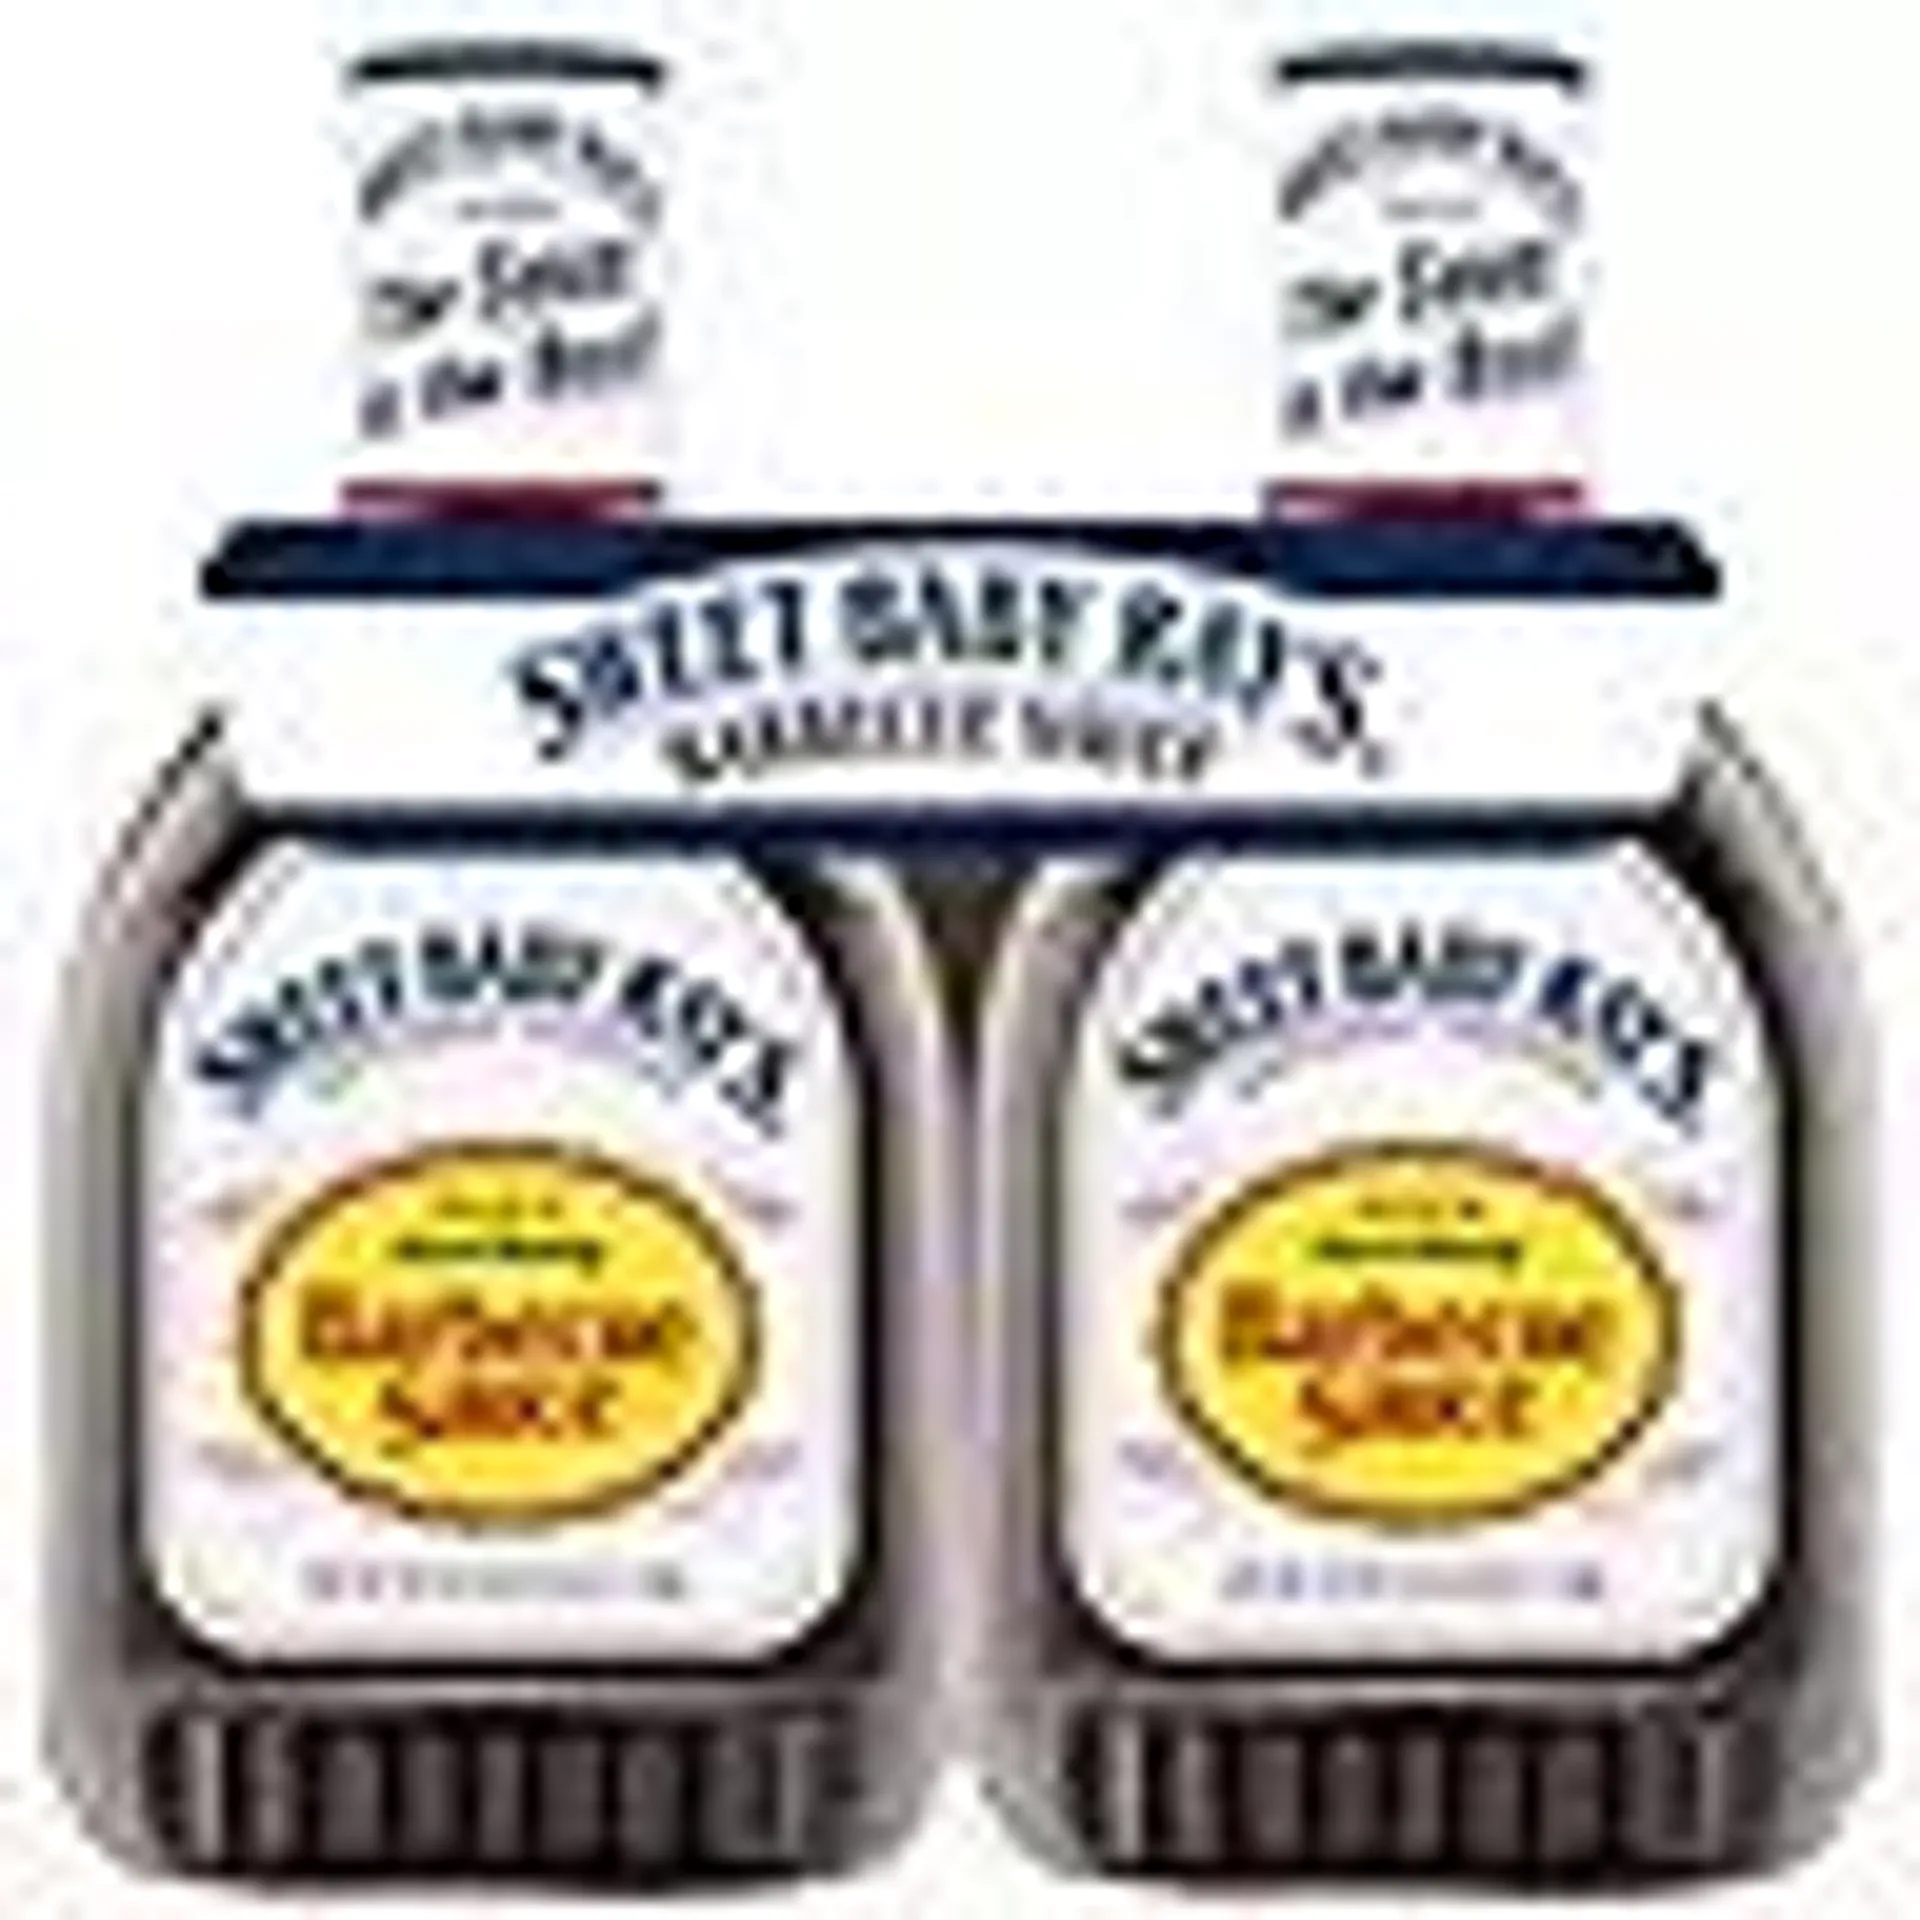 Sweet Baby Ray's Barbecue Sauce 40 oz., 2 pk.